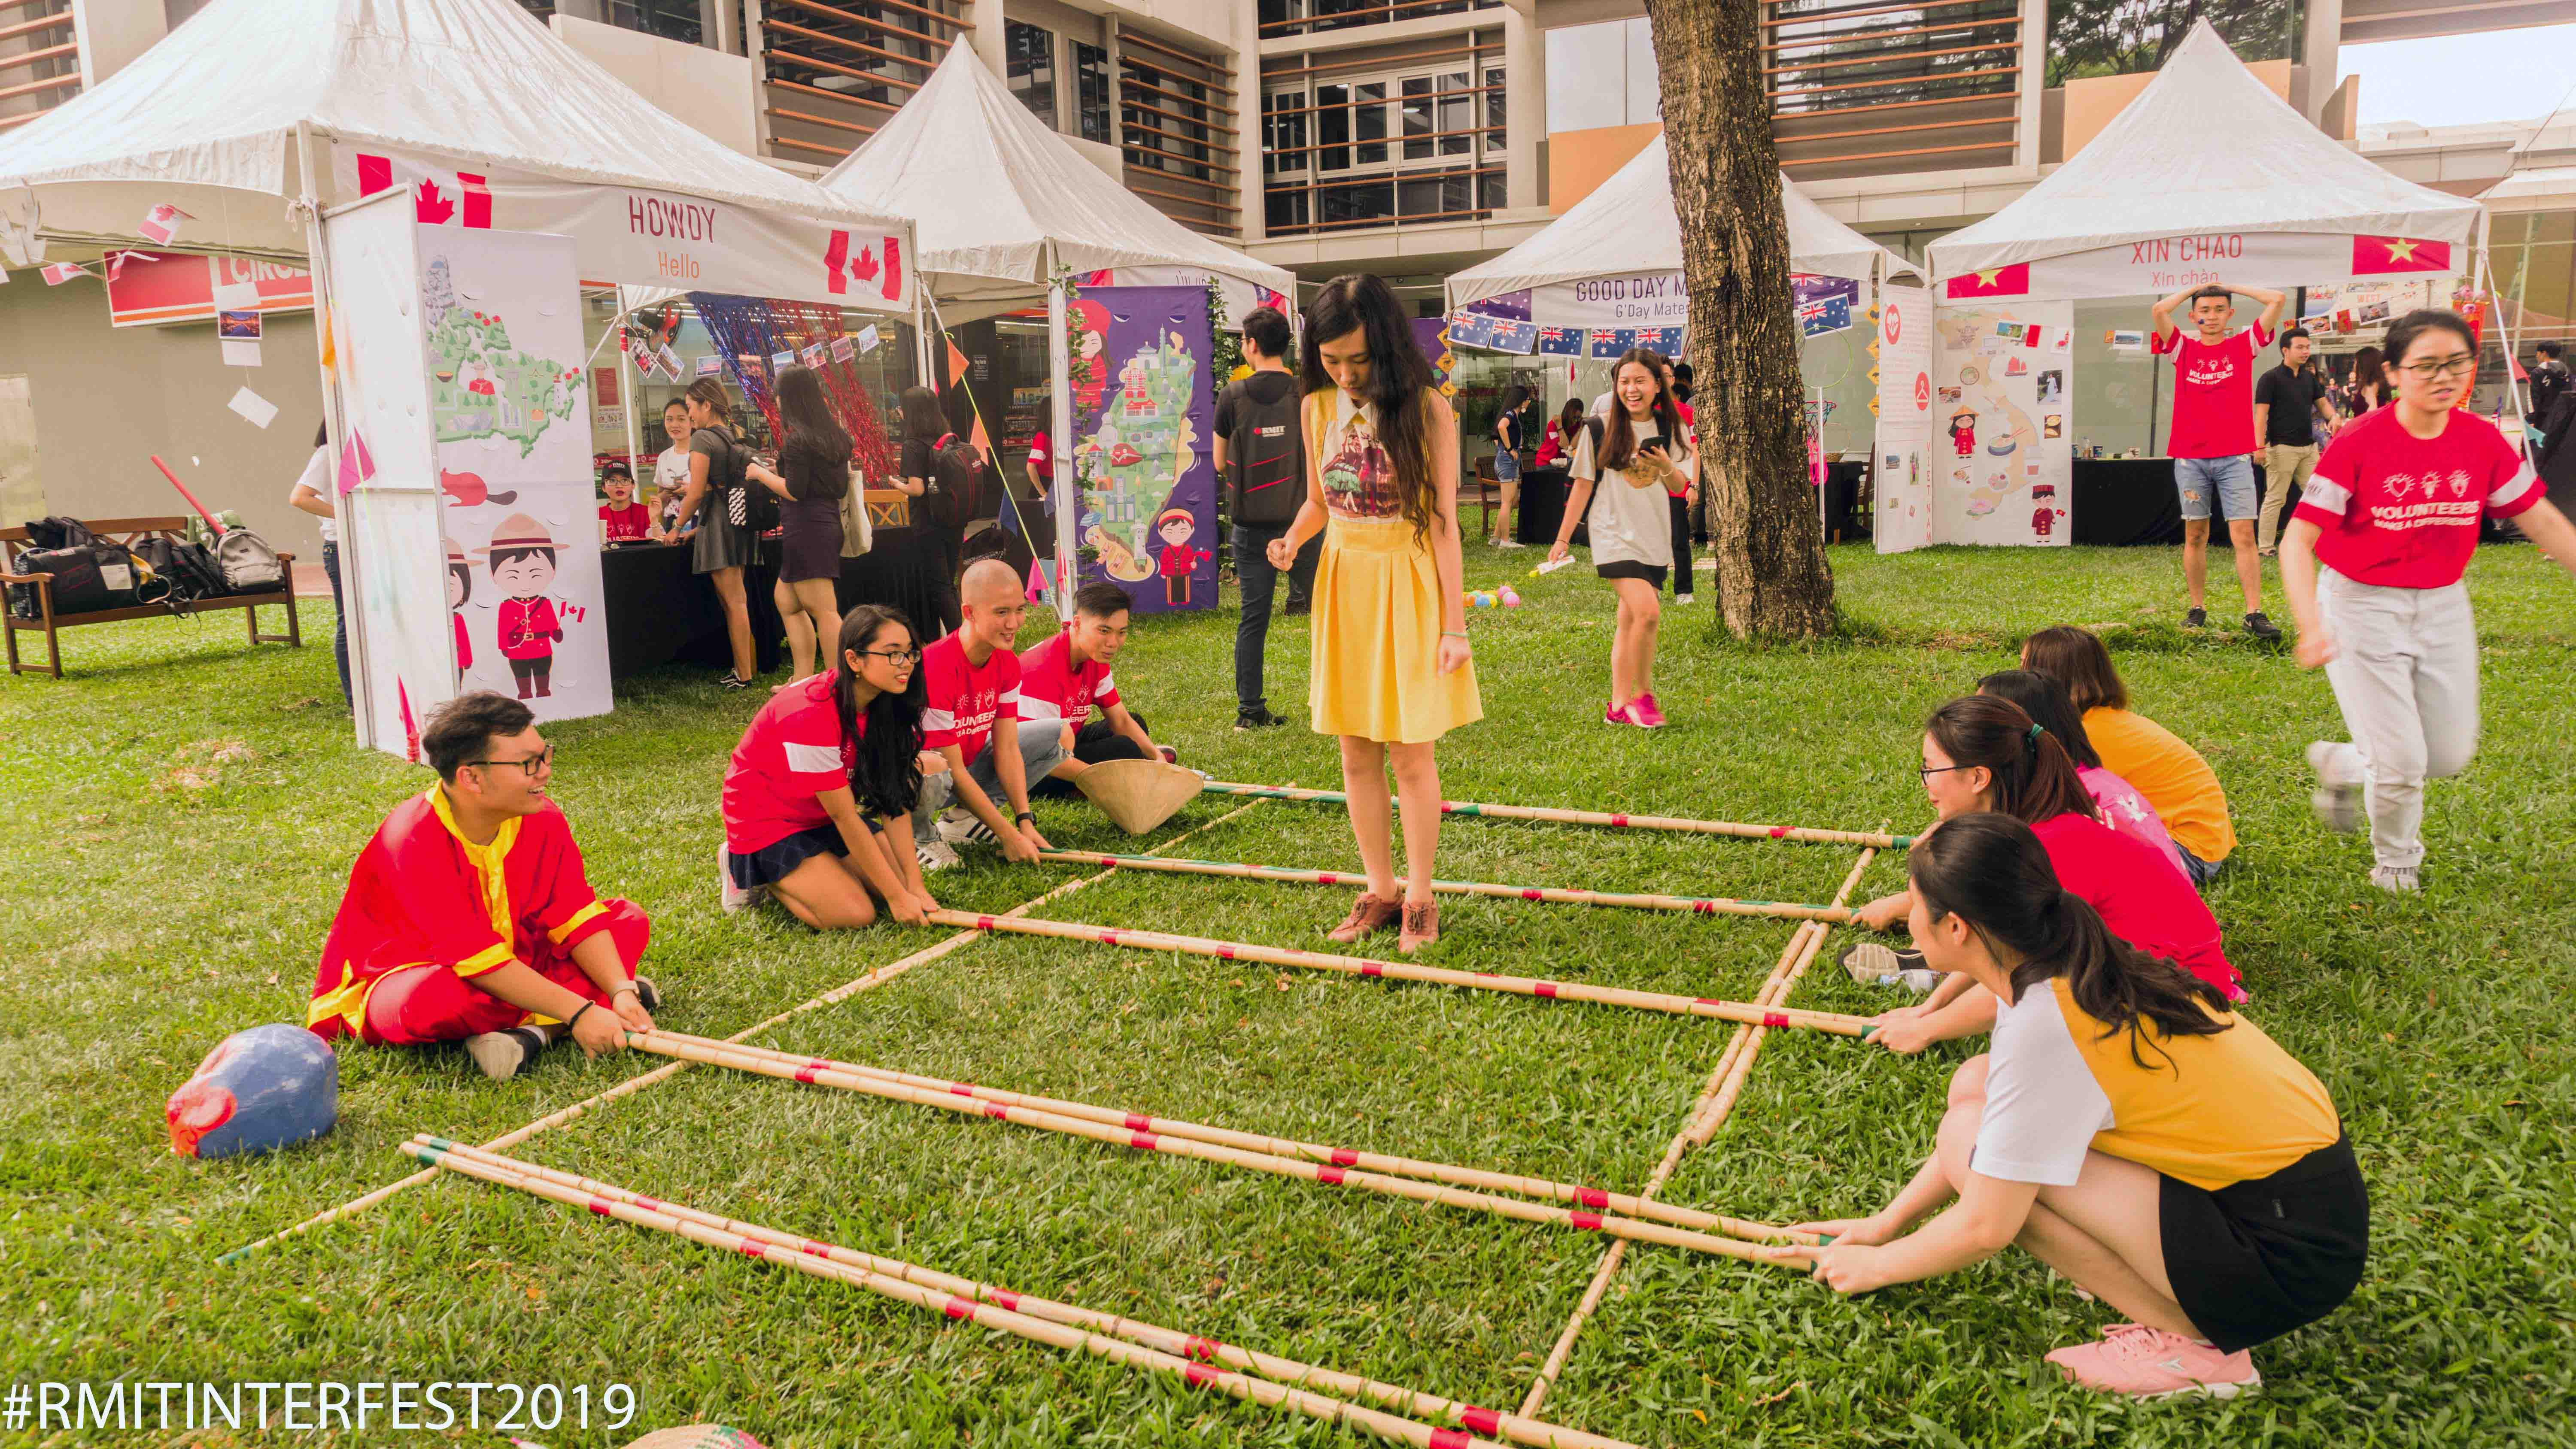 The traditional Vietnamese bamboo stick dance was a popular activity at the International Festival.